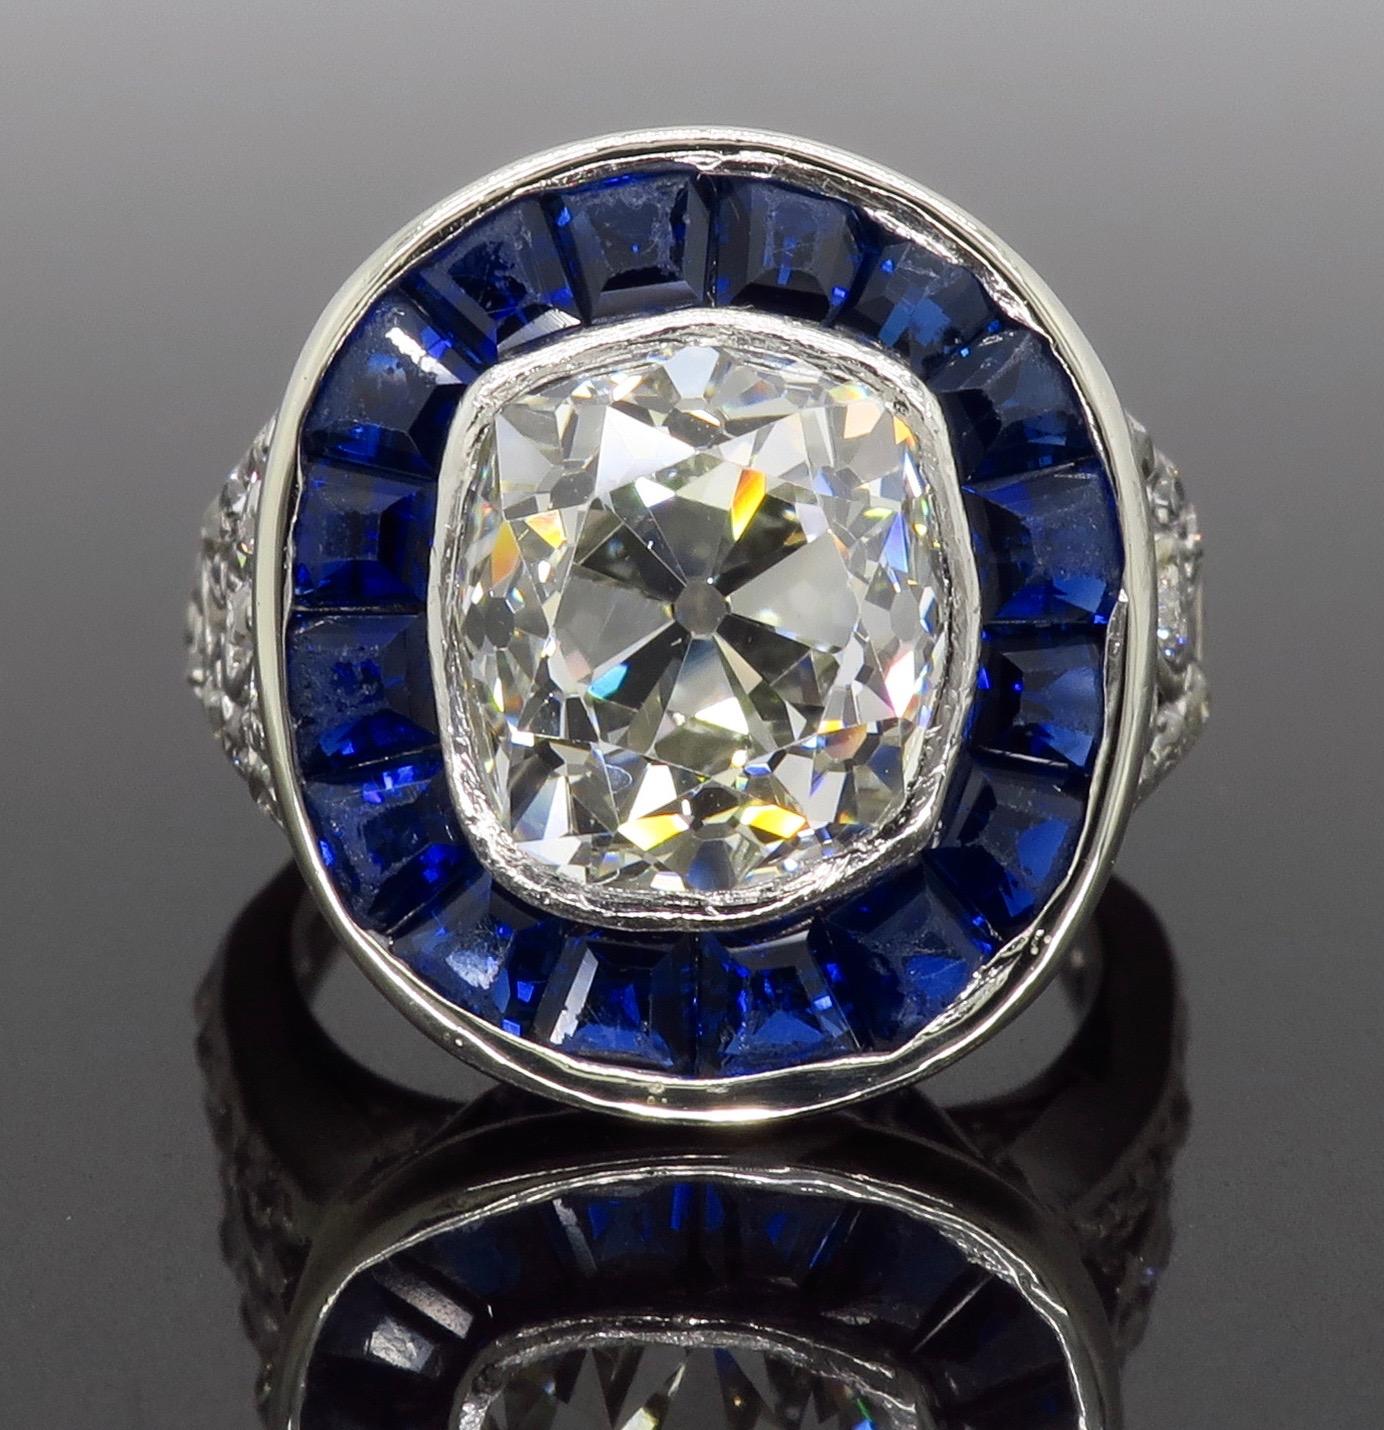 Vintage art deco ring featuring an approximately 3.25ct Old Miners Cut Diamond surrounded by irregular cut Blue Sapphires handcrafted in platinum.

Gemstone: Diamond & Sapphire
Gemstone Carat Weight: 16 Irregular Cut Blue Sapphires
Center Diamond